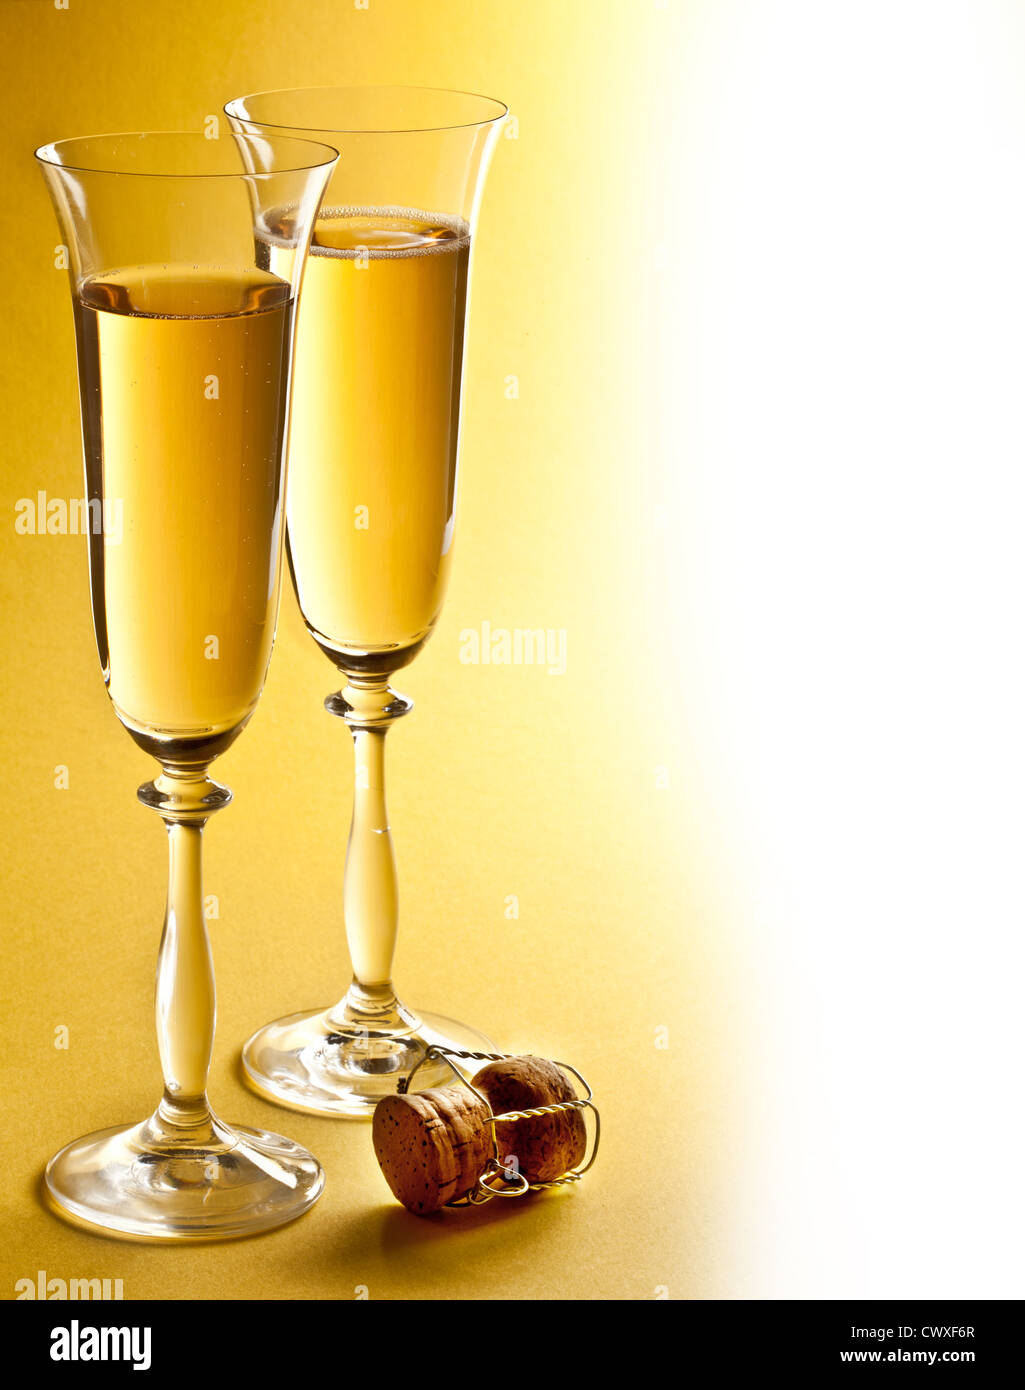 Two champagne glass on a yellow background. Stock Photo